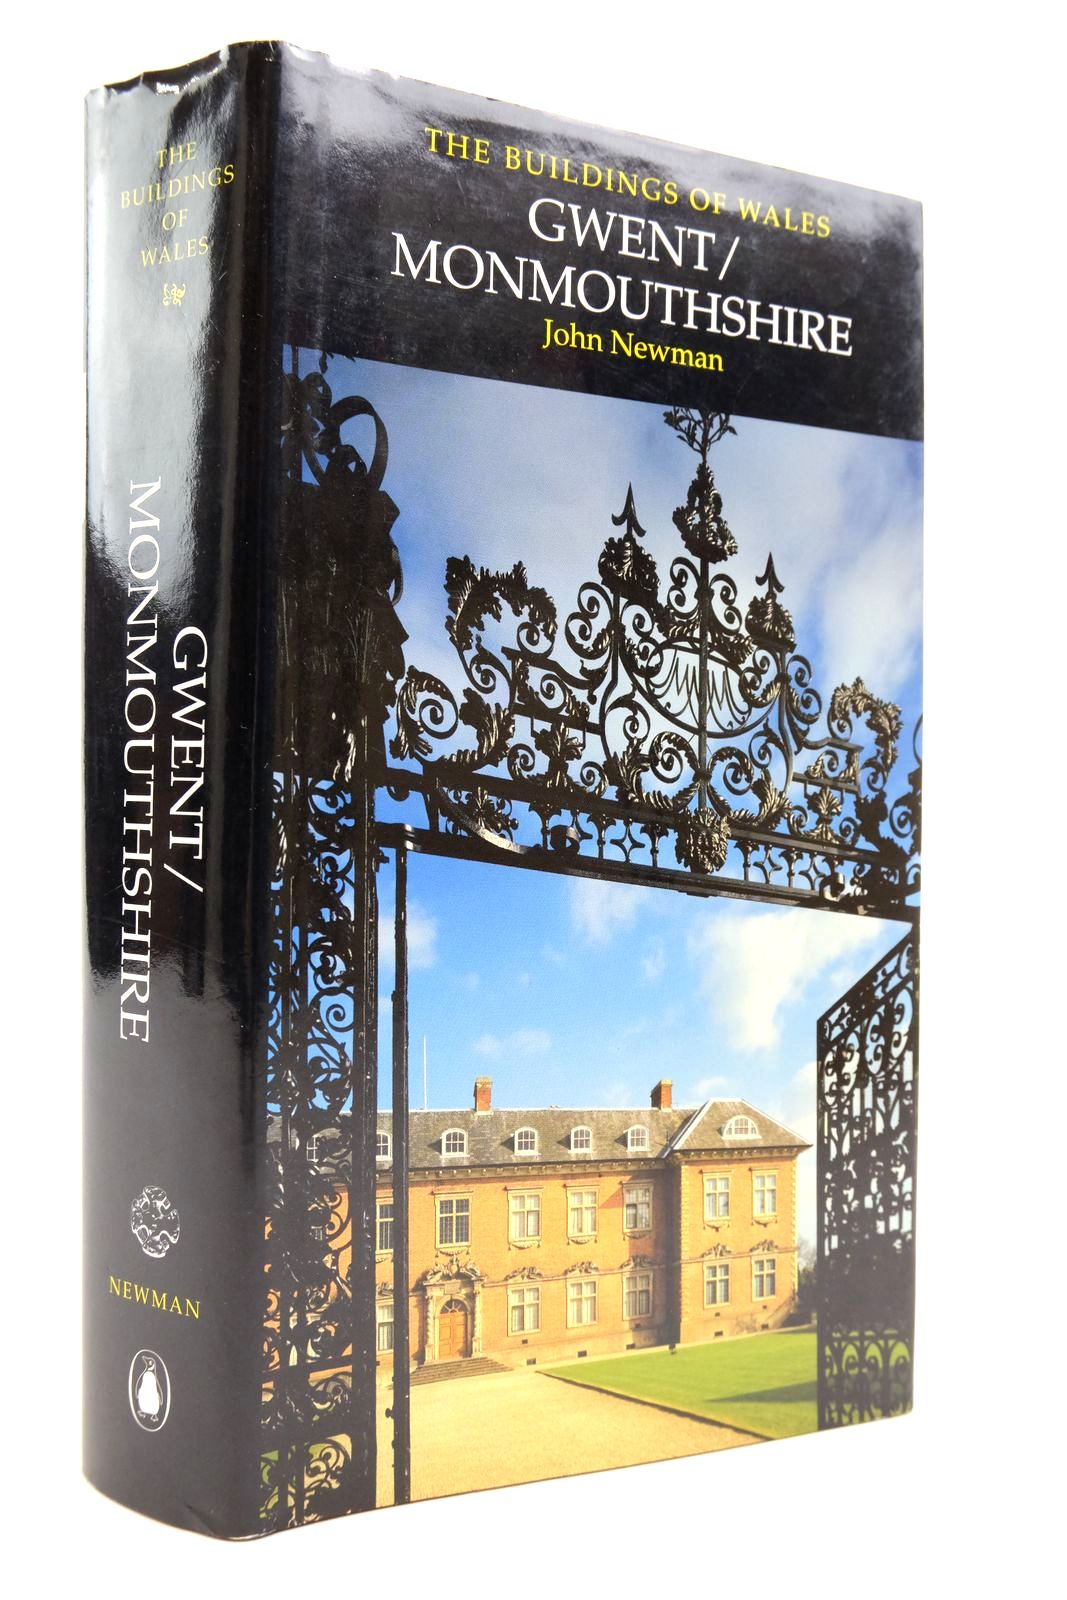 Photo of GWENT/MONMOUTHSHIRE (BUILDINGS OF WALES) written by Newman, John published by Penguin (STOCK CODE: 2140421)  for sale by Stella & Rose's Books